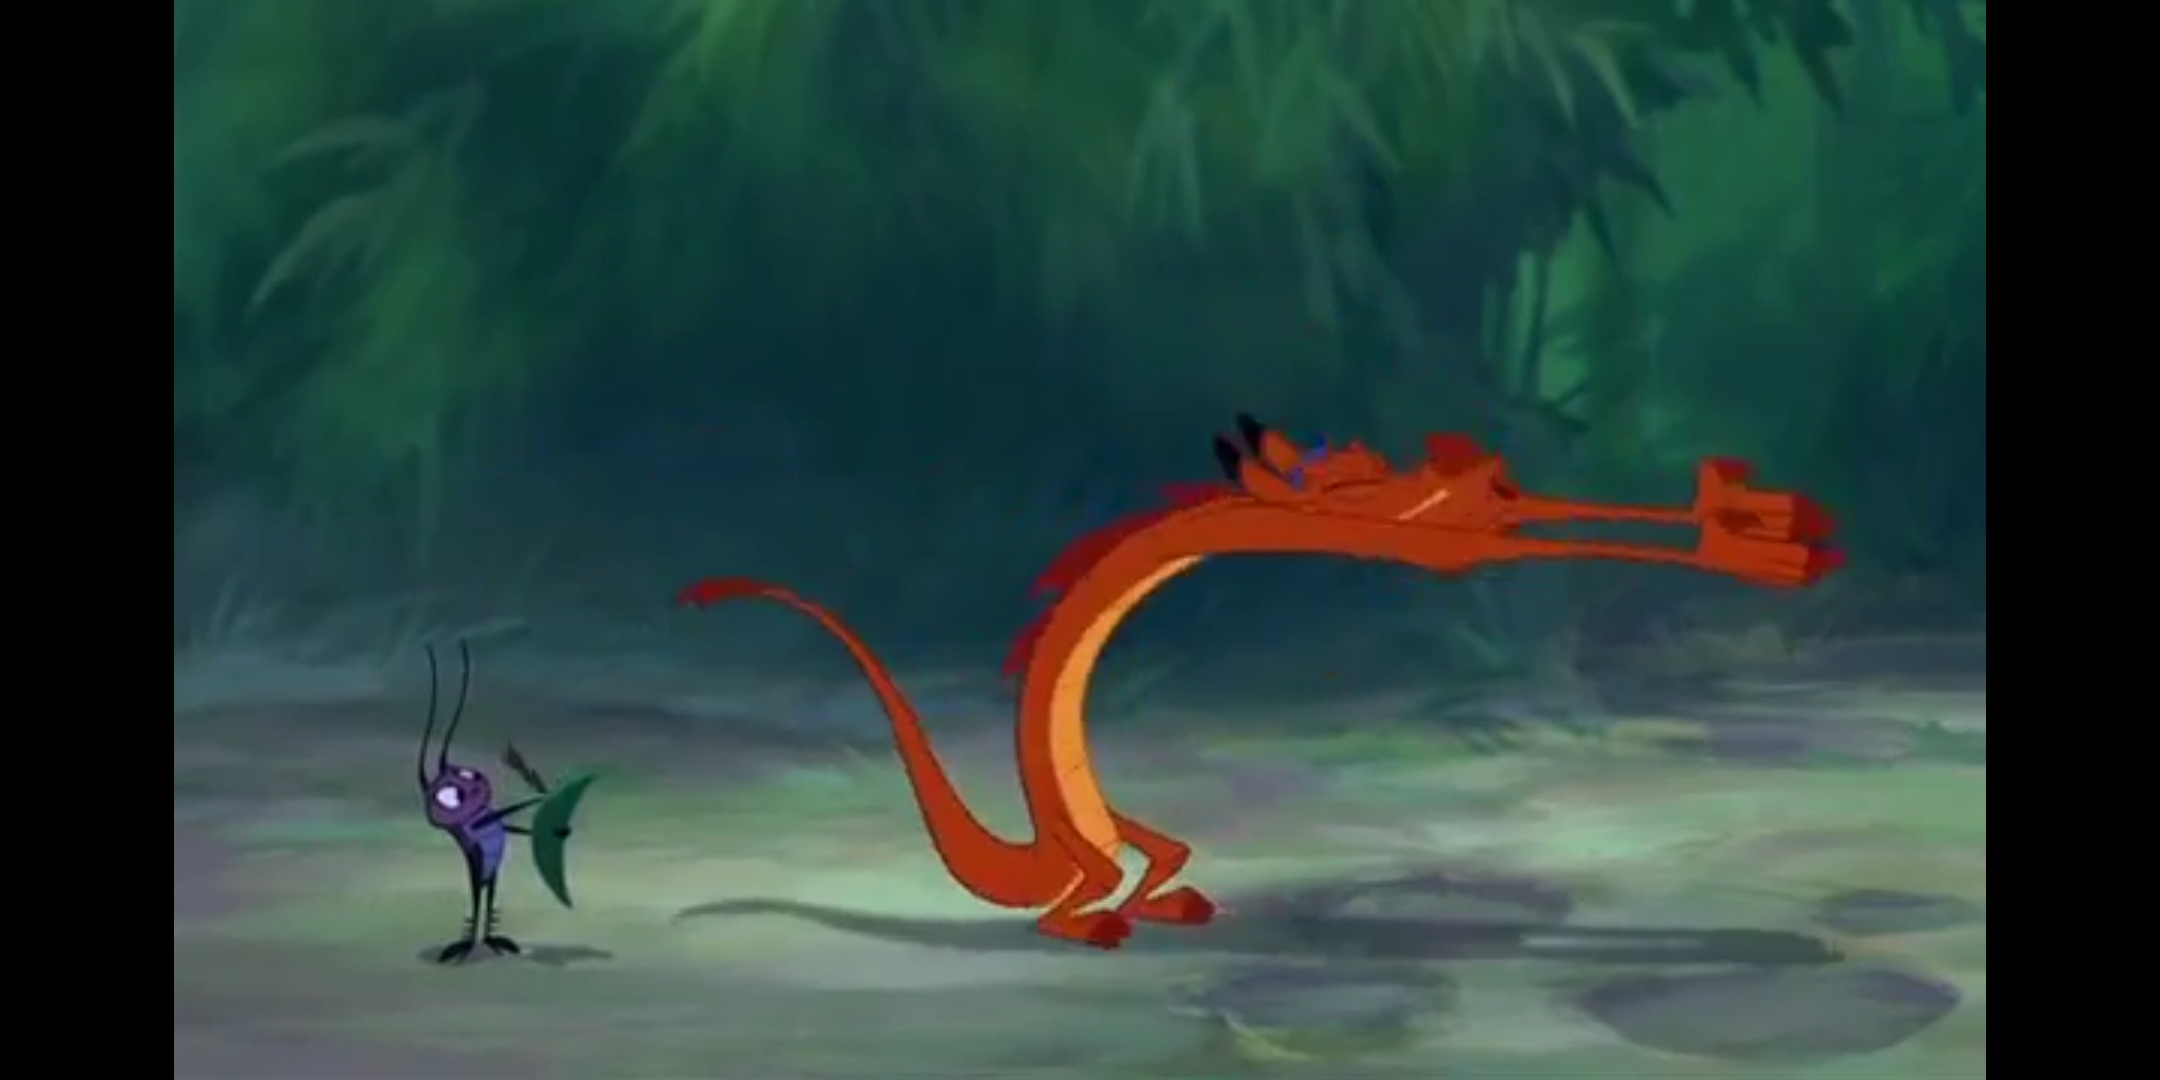 Dishonor on you Blank Meme Template